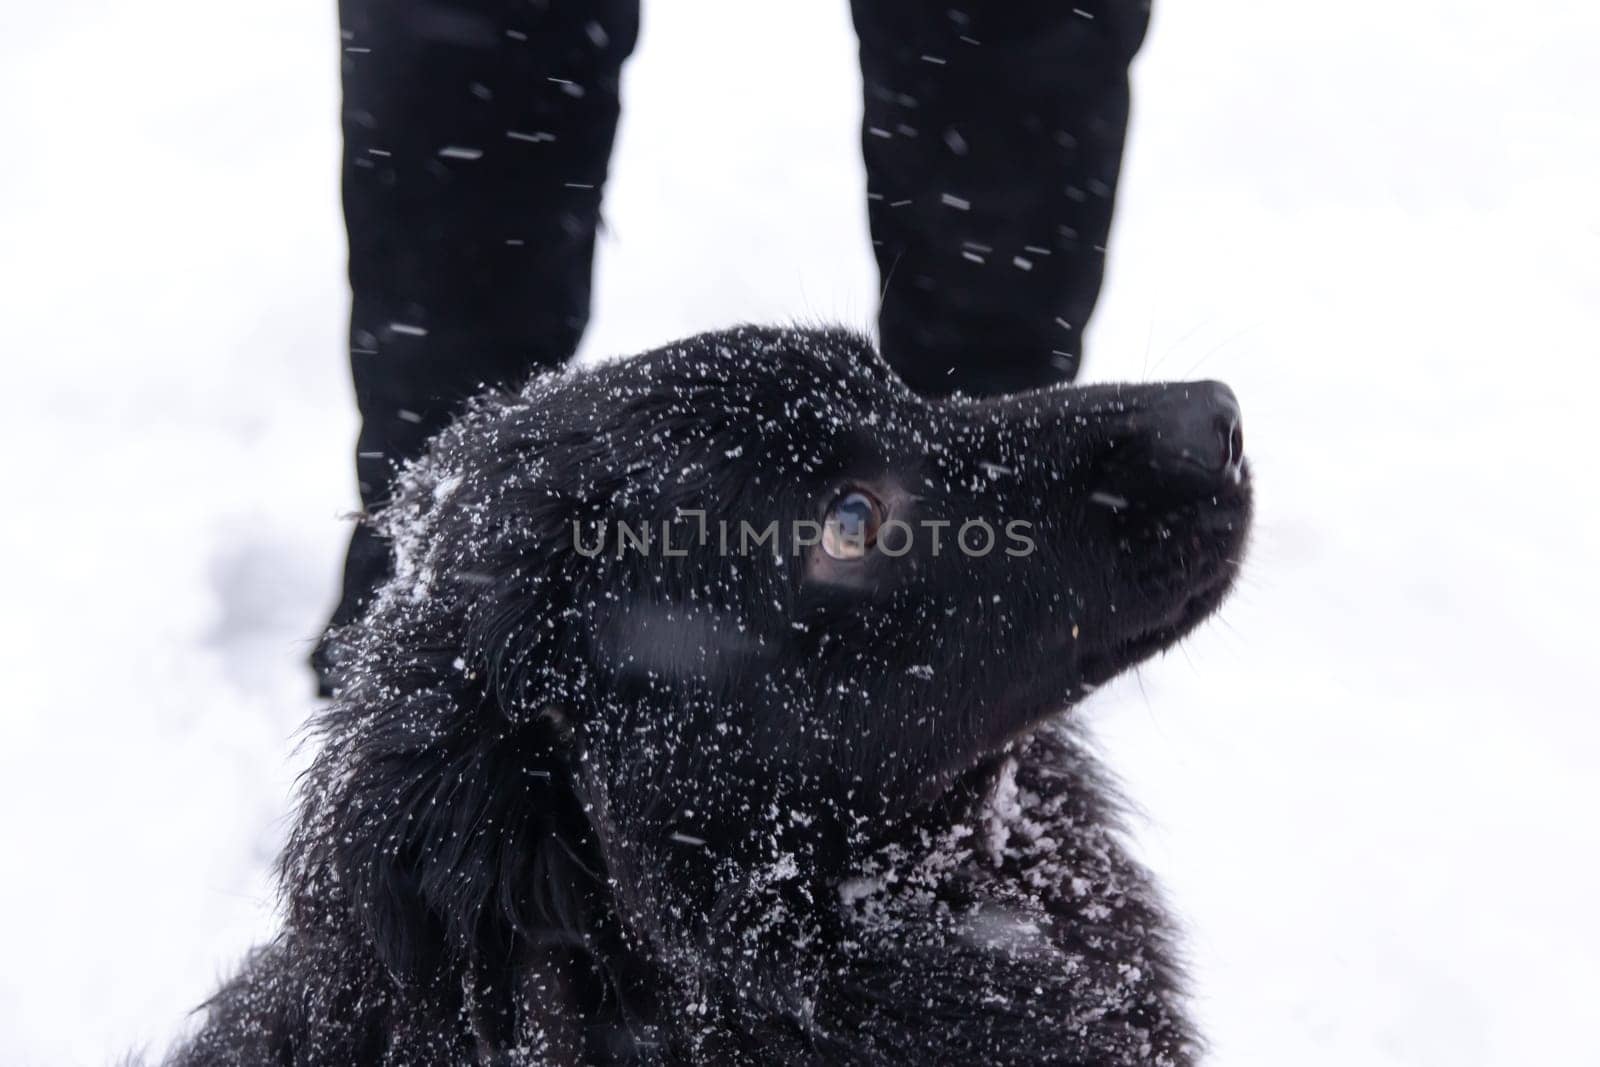 Black fluffy dog in the snow close up